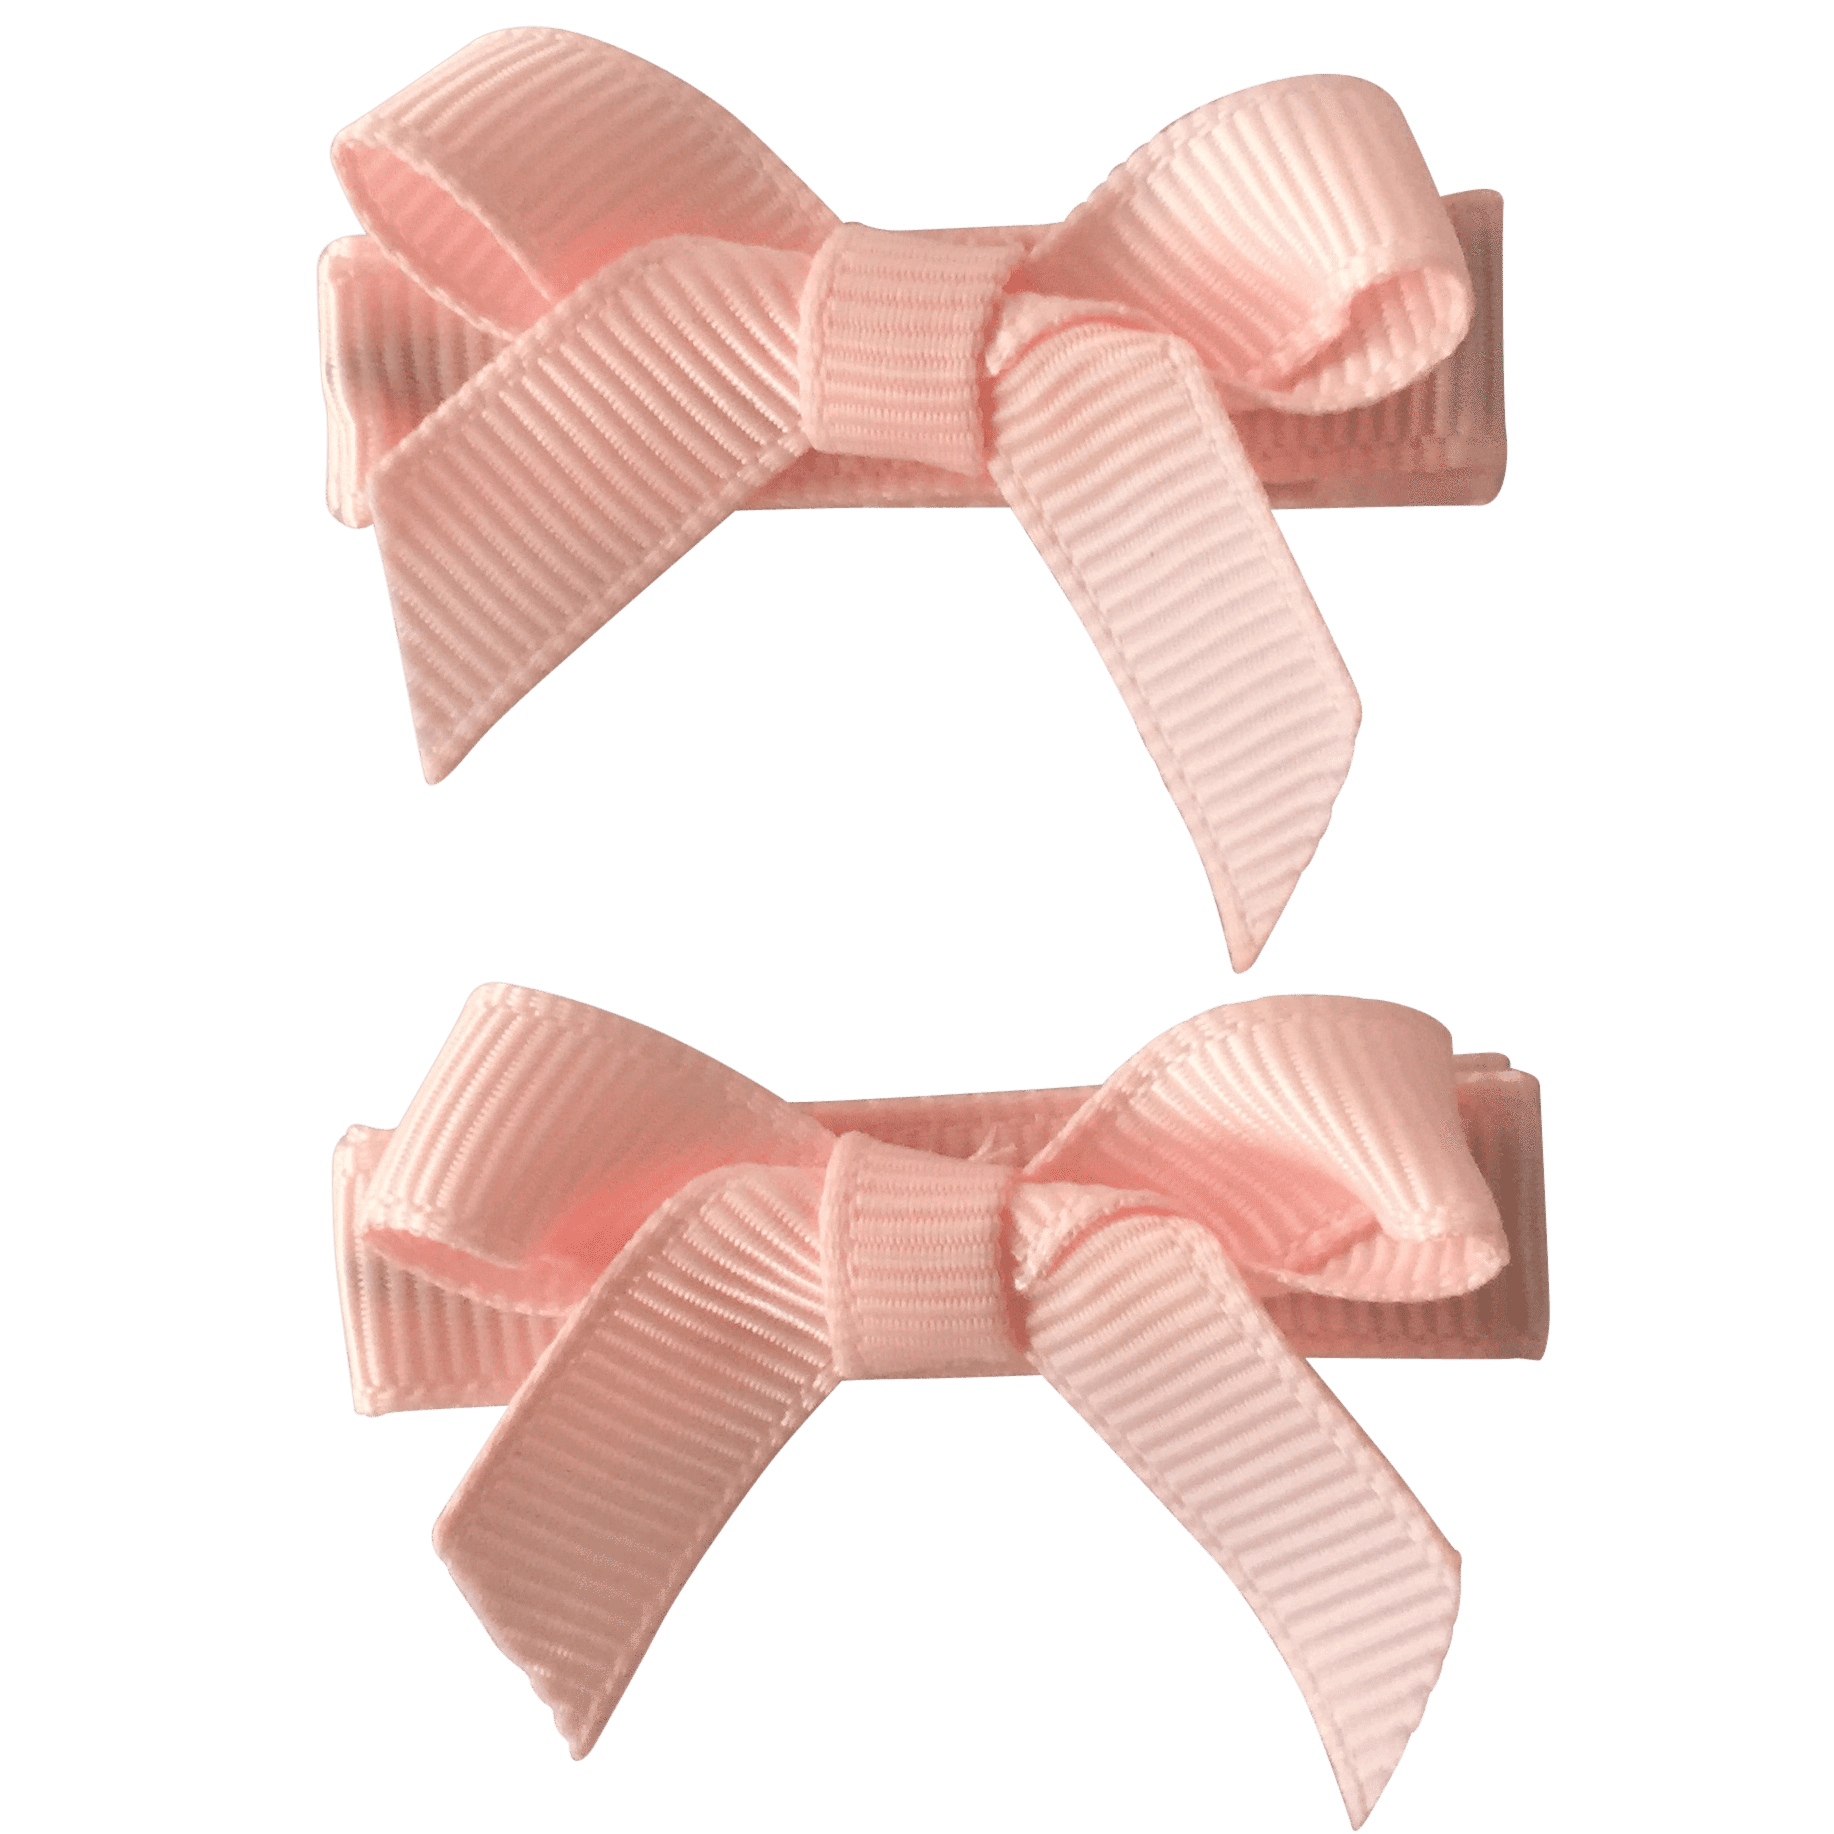 No Slip Bow Clips (2pc) - Ponytails and Fairytales